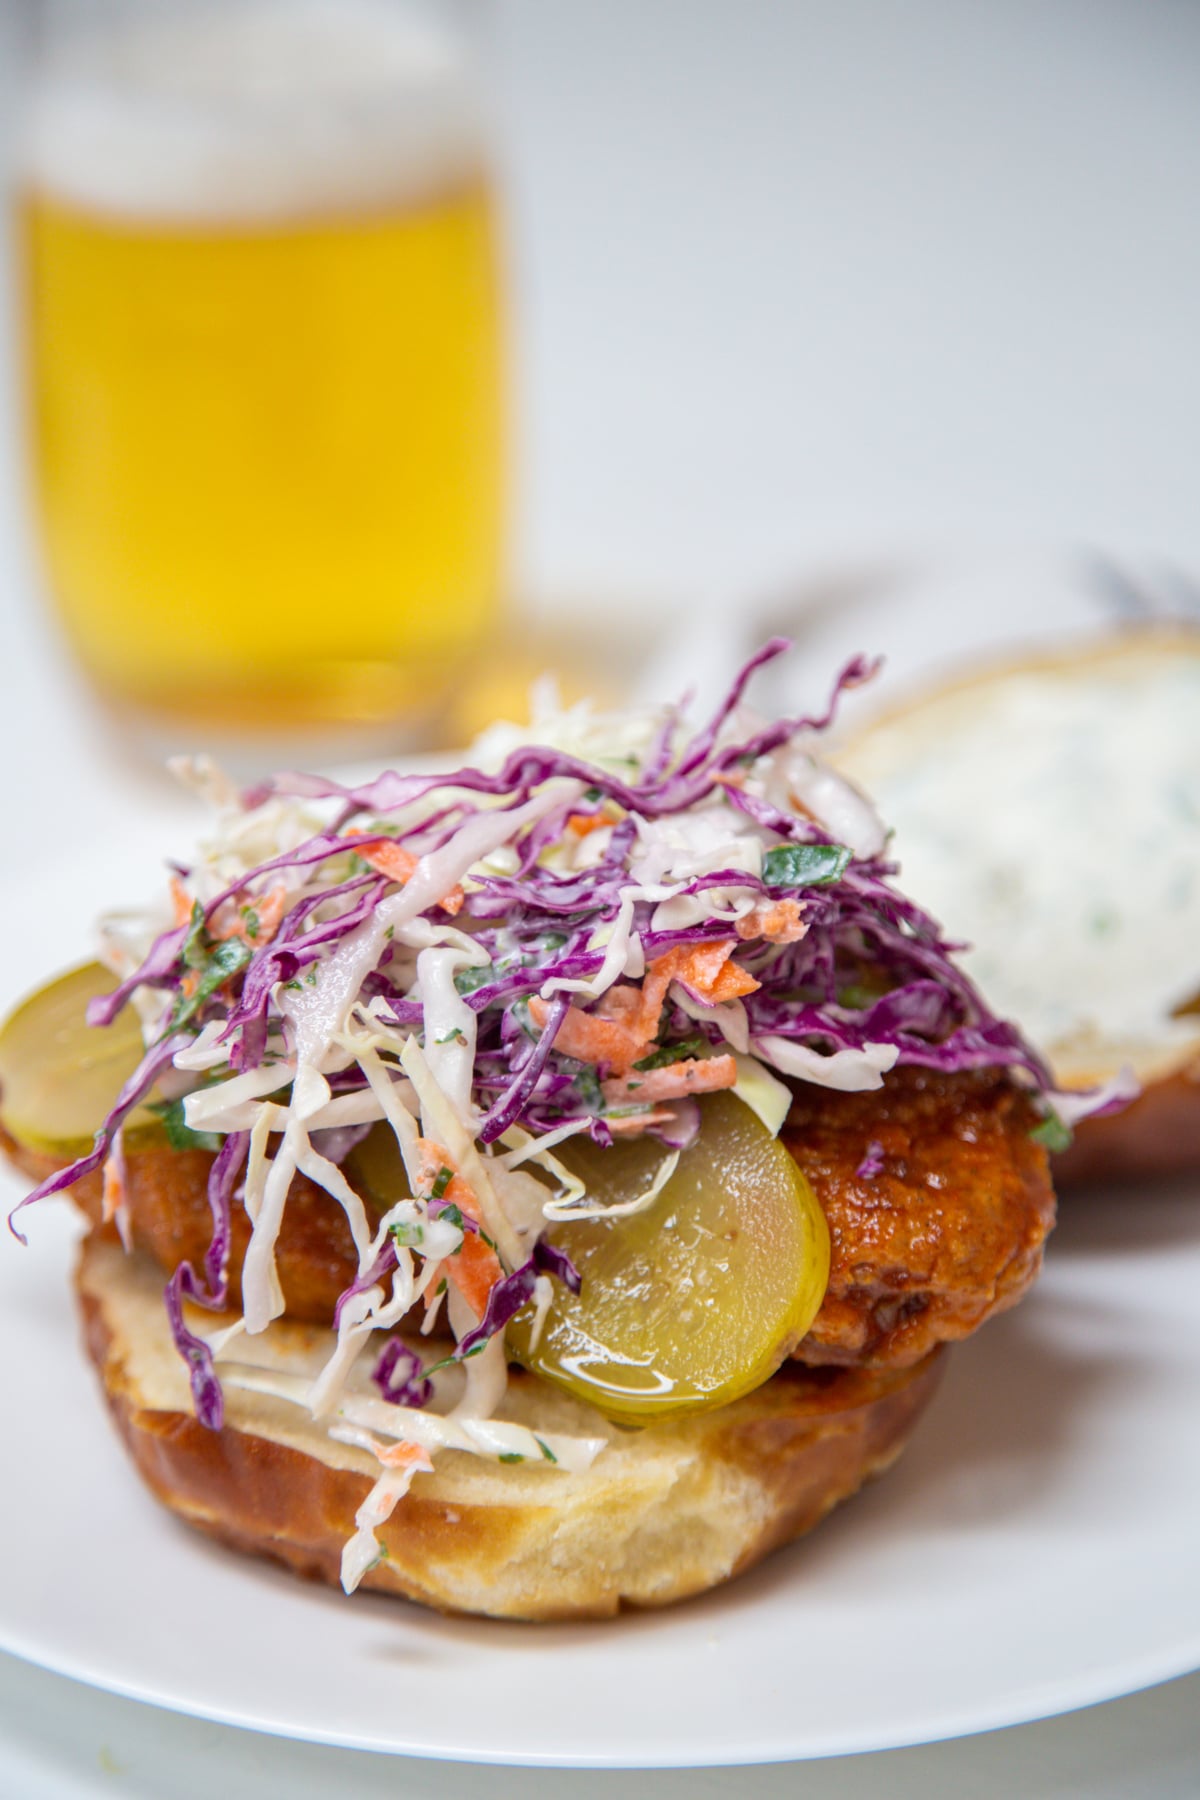 A fried chicken sandwich with pickles and creamy coleslaw on top of it and a glass of beer in the background.